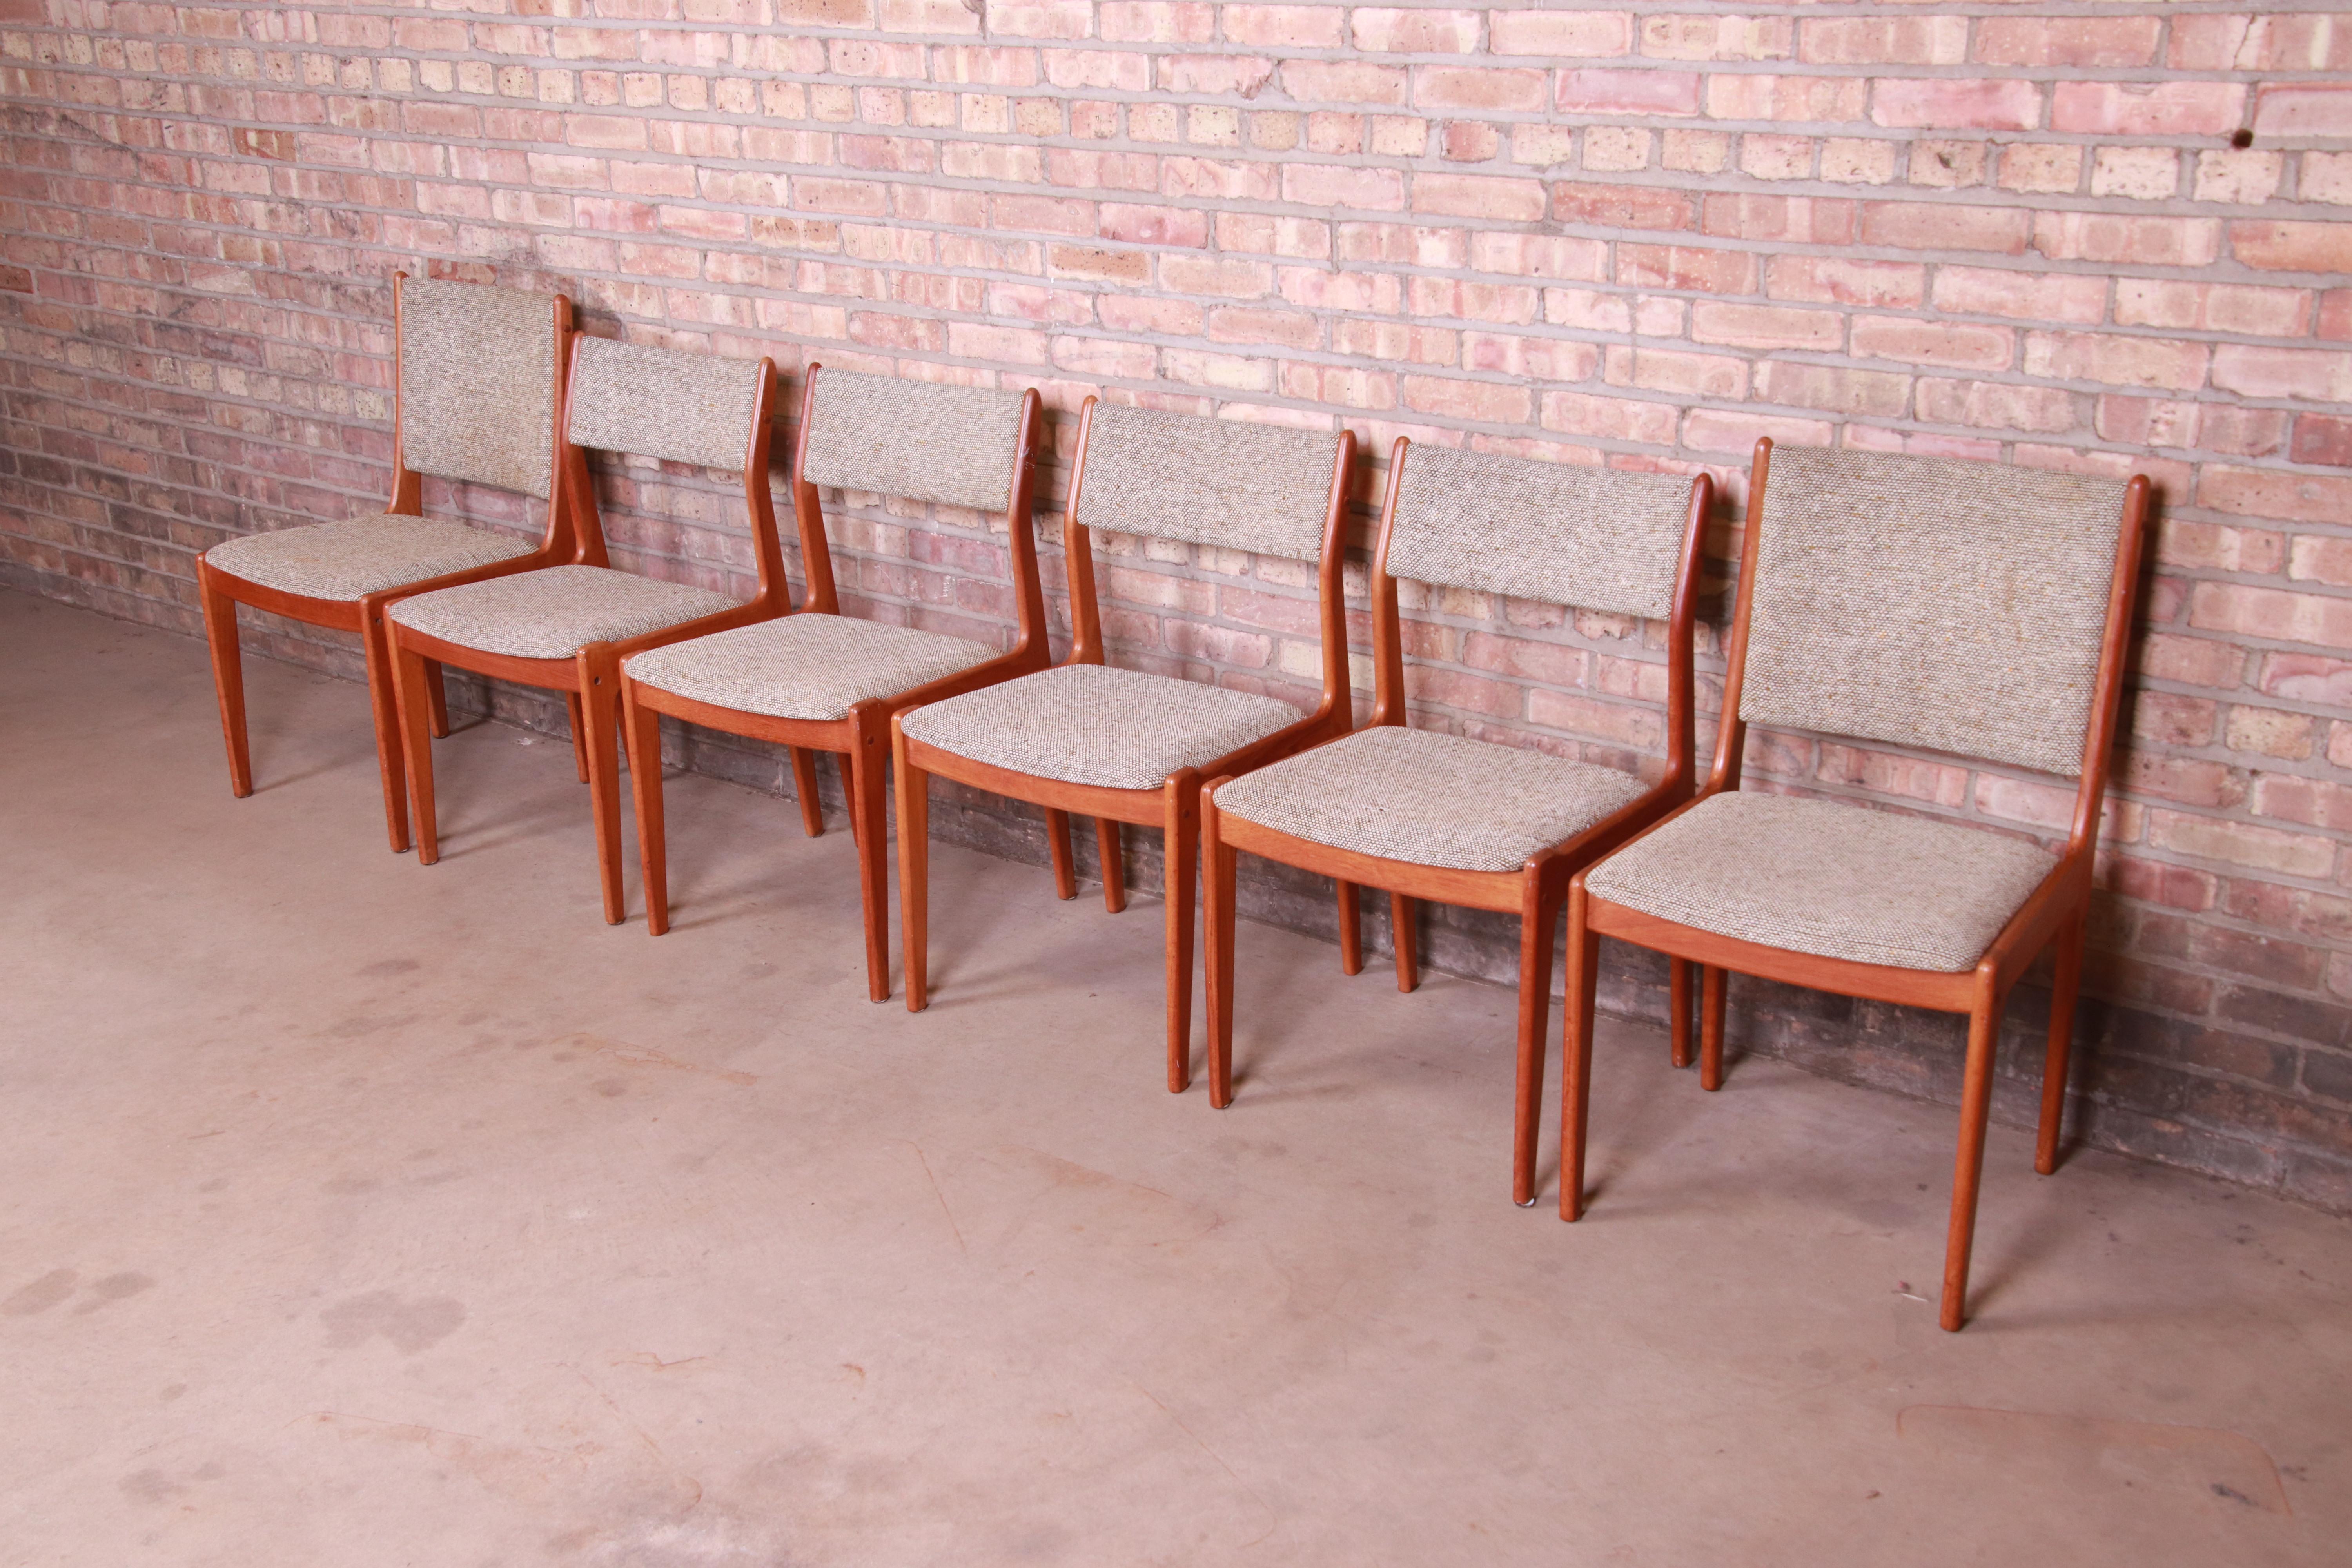 A gorgeous set of six mid-century Danish modern style dining chairs

In the manner of J.L. Moller

By Scandinavia Woodworks Co.

Singapore, Mid-20th Century

Sculpted teakwood frames, with upholstered seats and backs.

Measures:
Captain